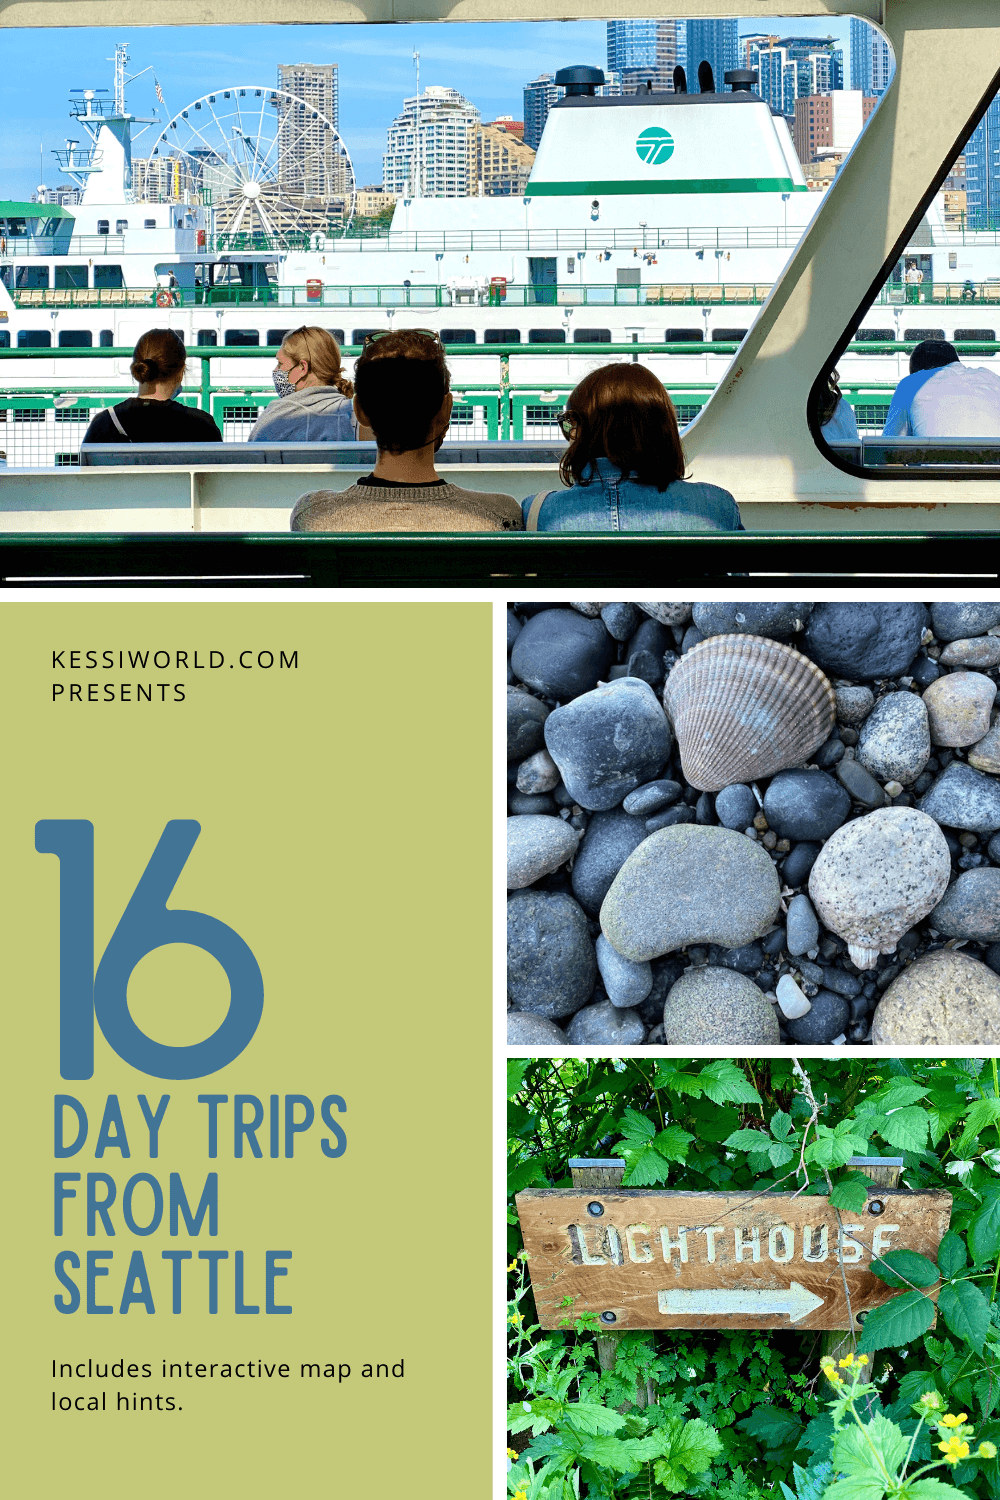 This Pinterest Pin outlines day trips from Seattle and has three photos.  The first photo is a shot on a Washington State Ferry, the second are rocks and seashells from a Salish Sea beach and the third a wooden sign pointing to a lighthouse.